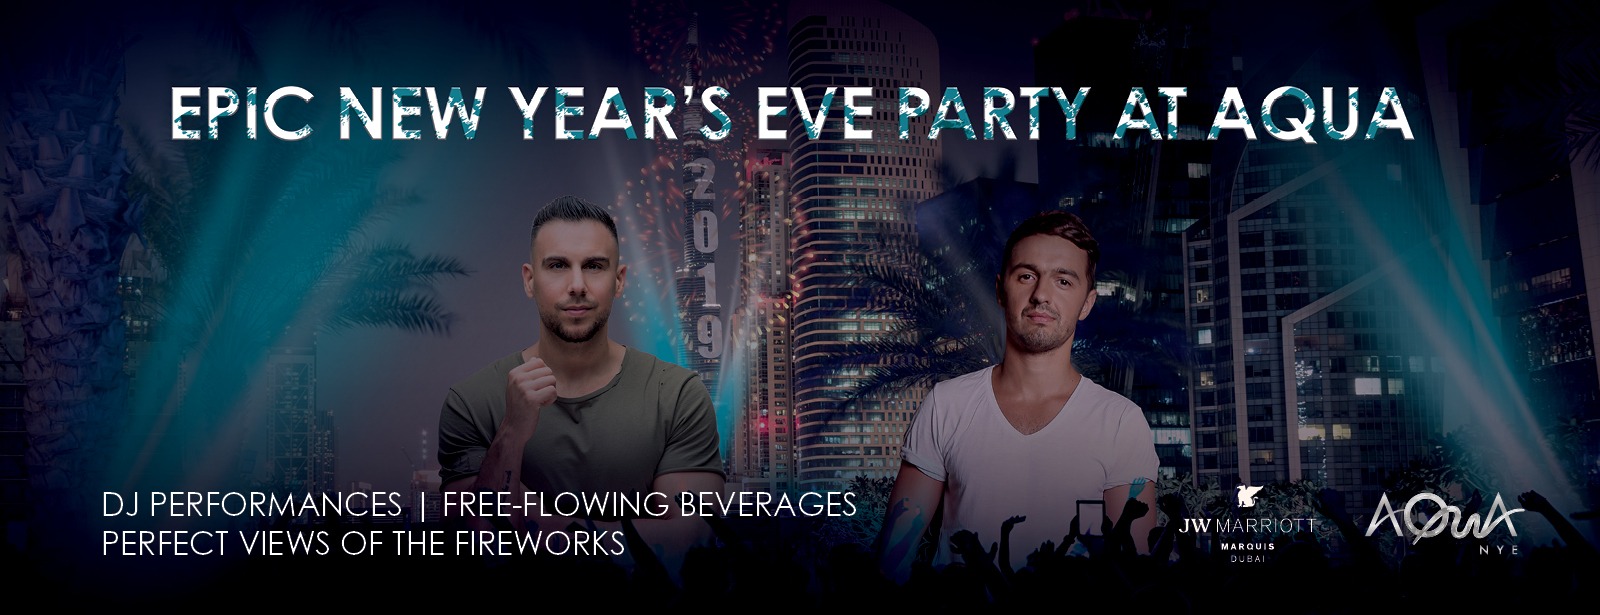 New Year’s Eve Party At Aqua - Coming Soon in UAE